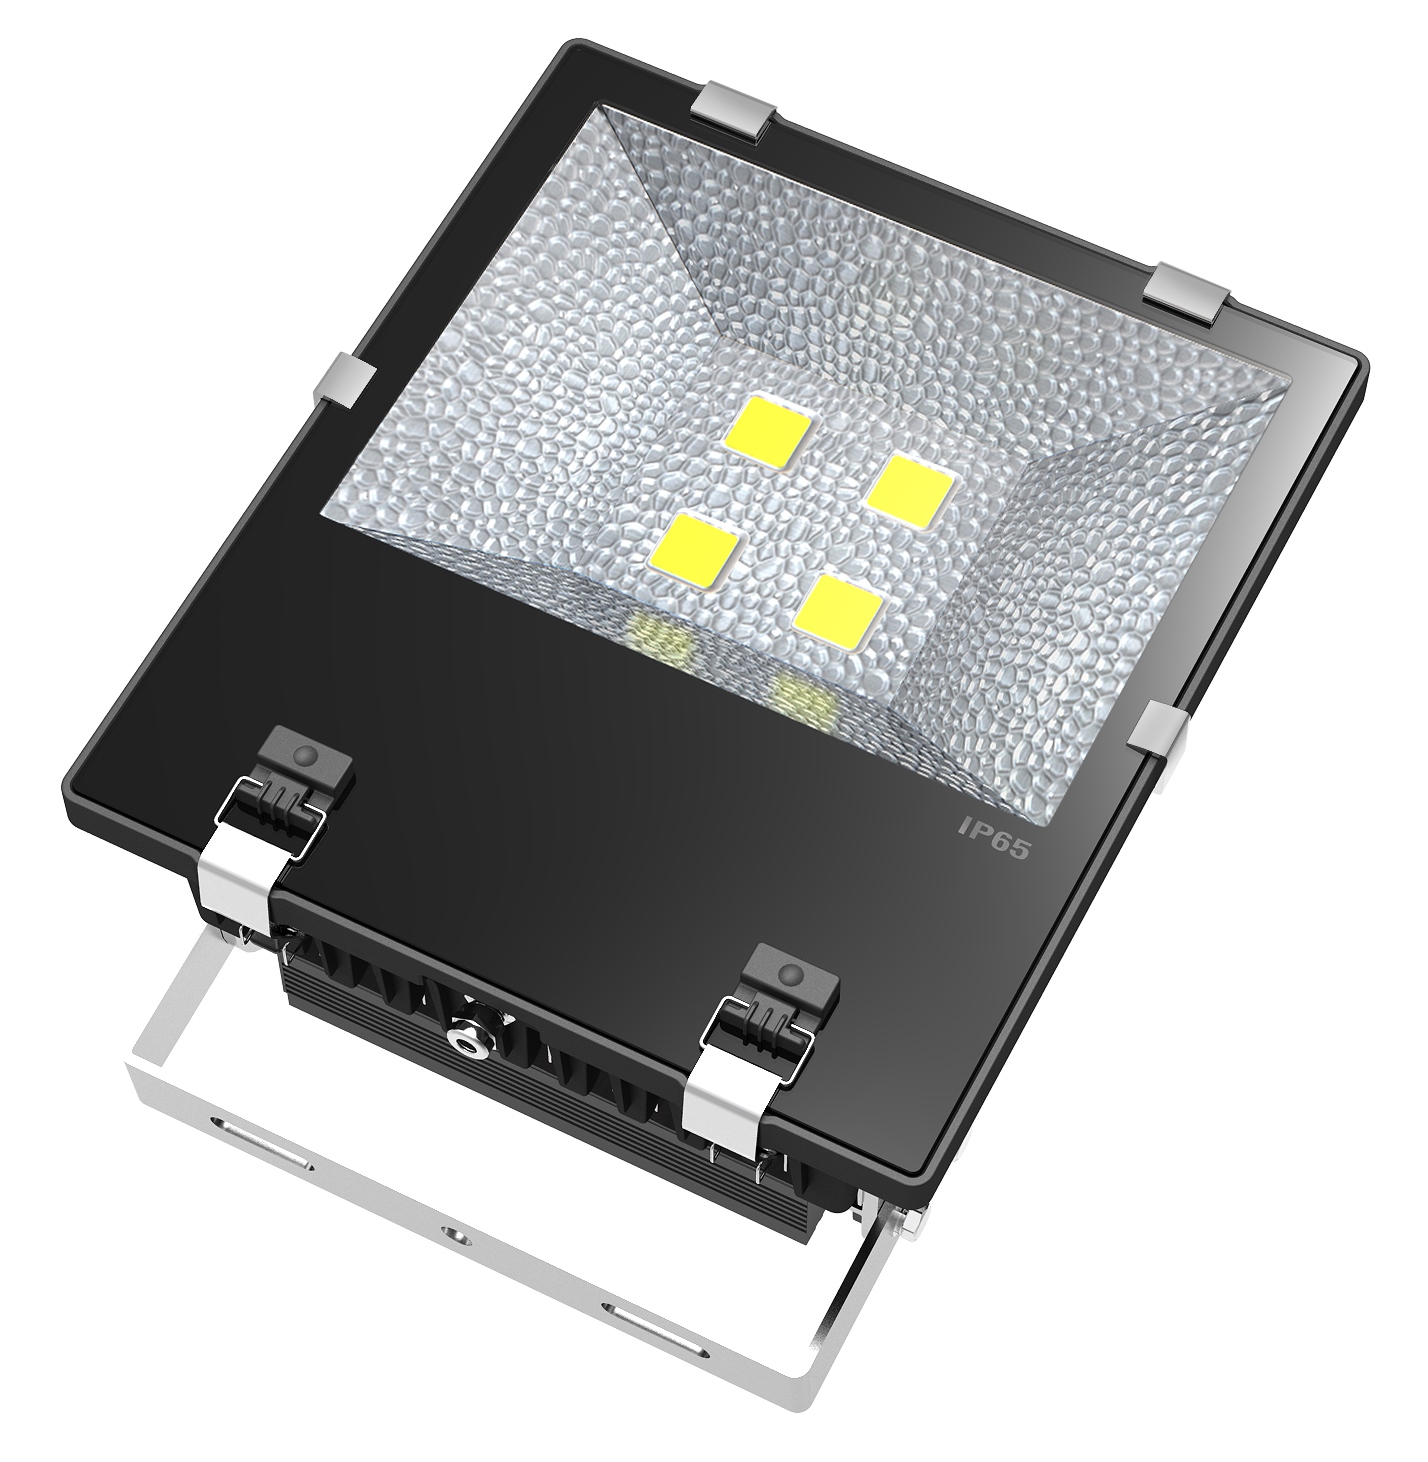 FL-10W 30W 50W 100W 200W 400W|Flood LED(New).The switch to high-performance GLLL LED lighting gives environments more flexible lighting control and also achieves substantial power savings.